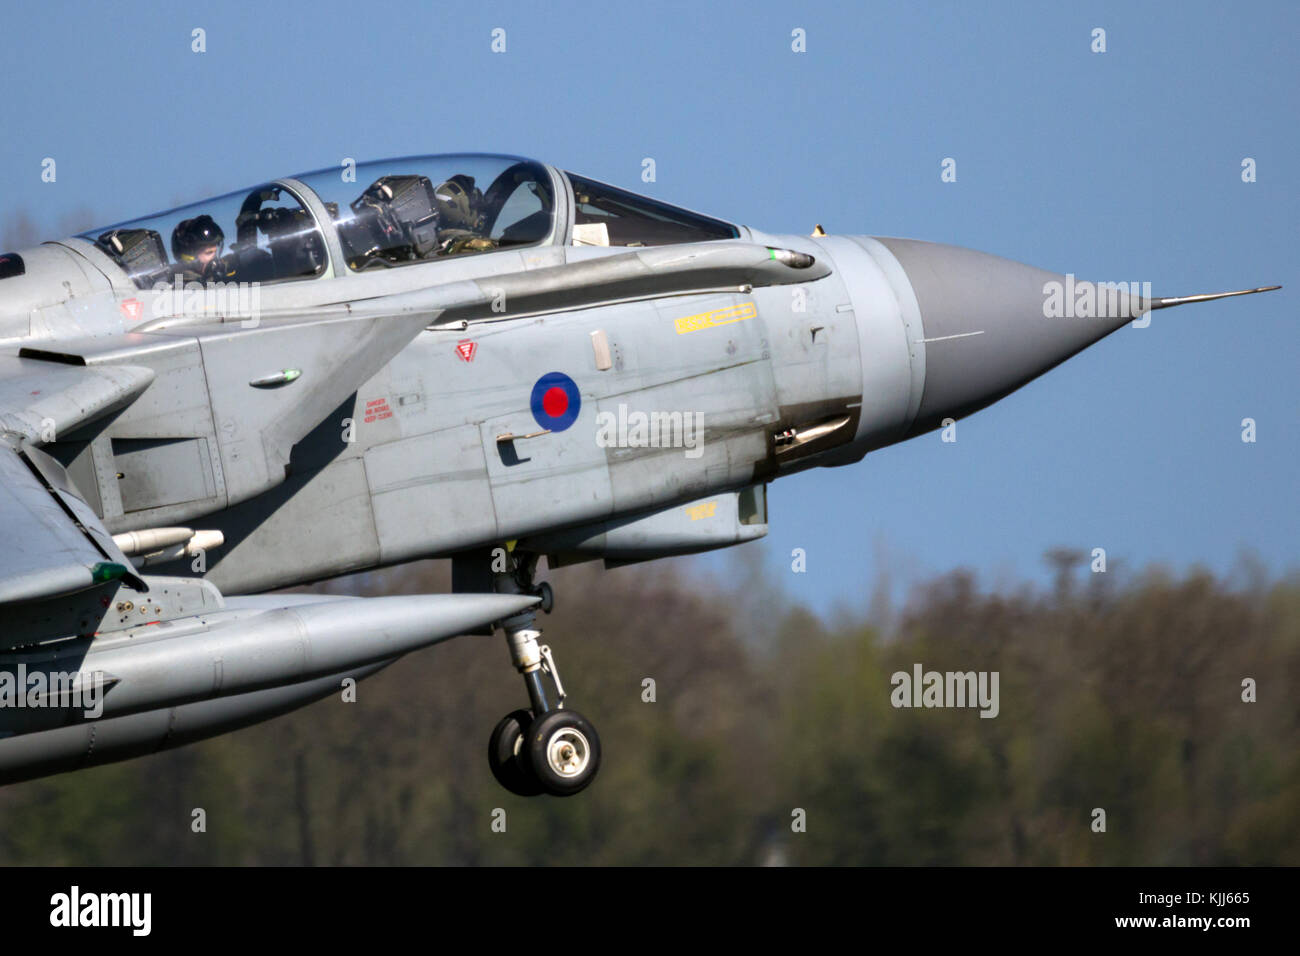 LEEUWARDEN, THE NETHERLANDS - APR 21, 2016: British Royal Air Force Panavia Tornado strike aircraft landing on Leeuwarden airbase during military exer Stock Photo